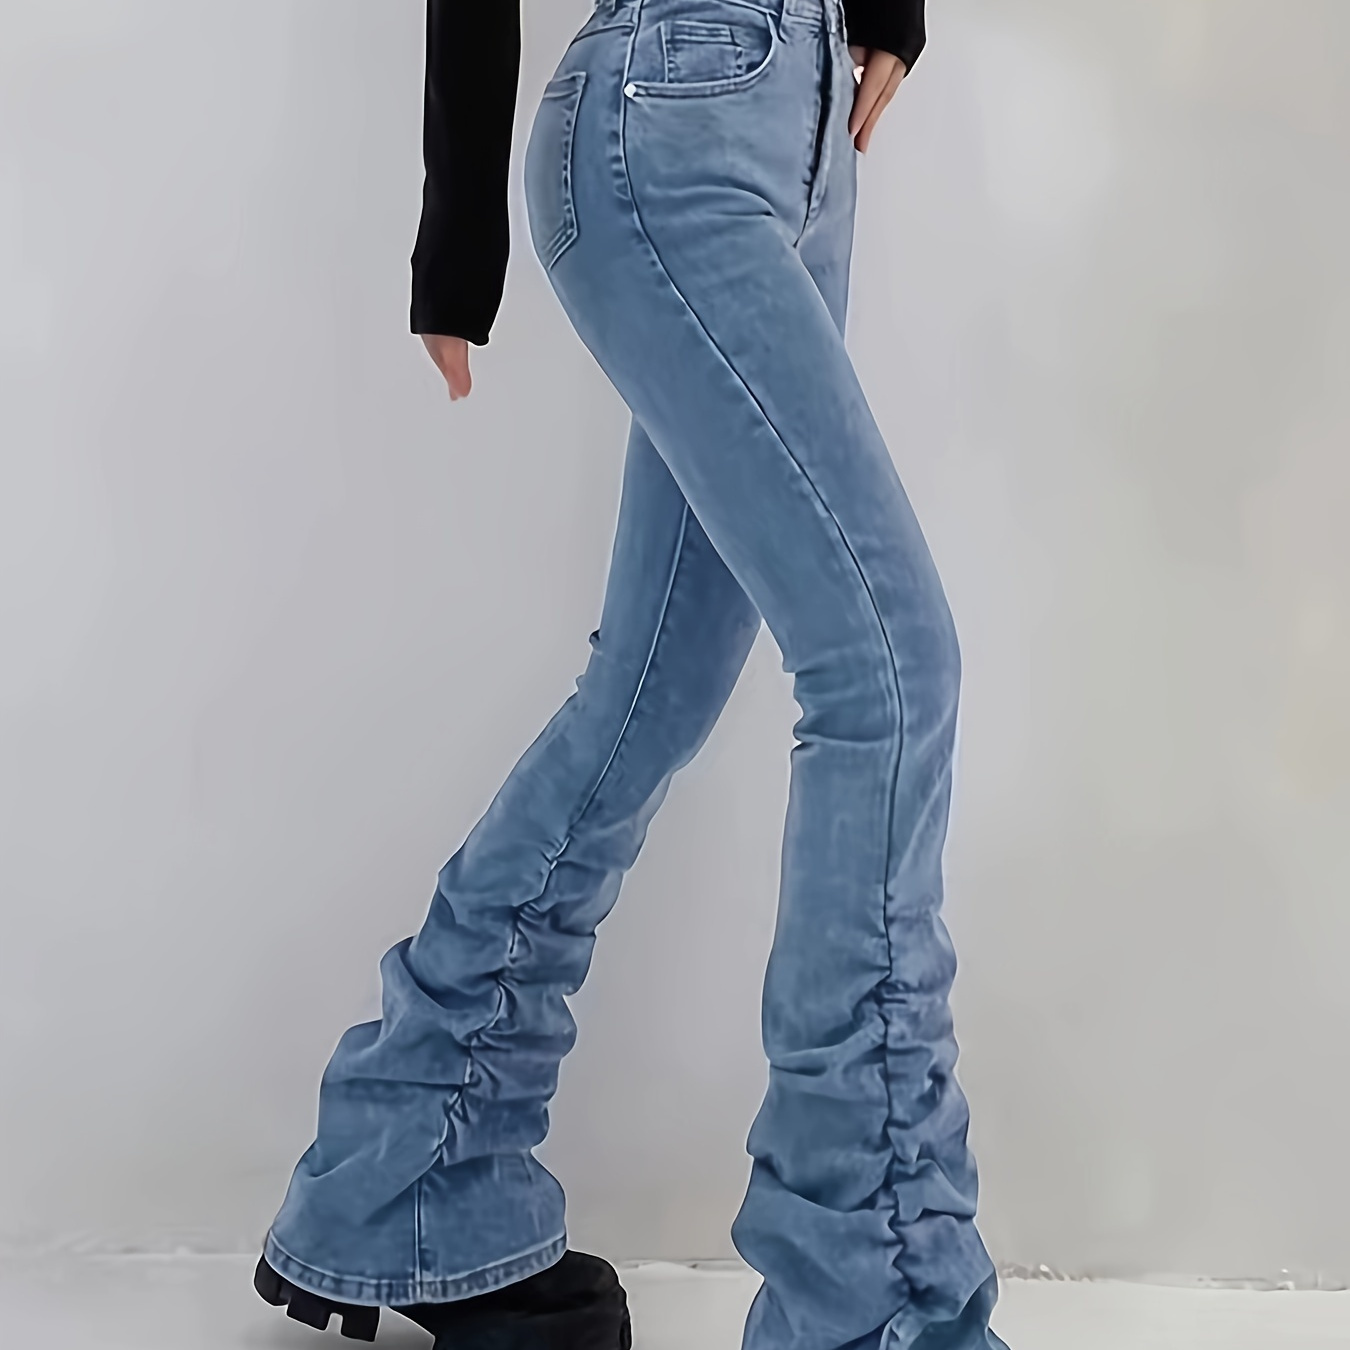 

High Waist Chic Stacked Jeans, Slant Pockets High Stretch Bootcut Jeans, Women's Denim Jeans & Clothing